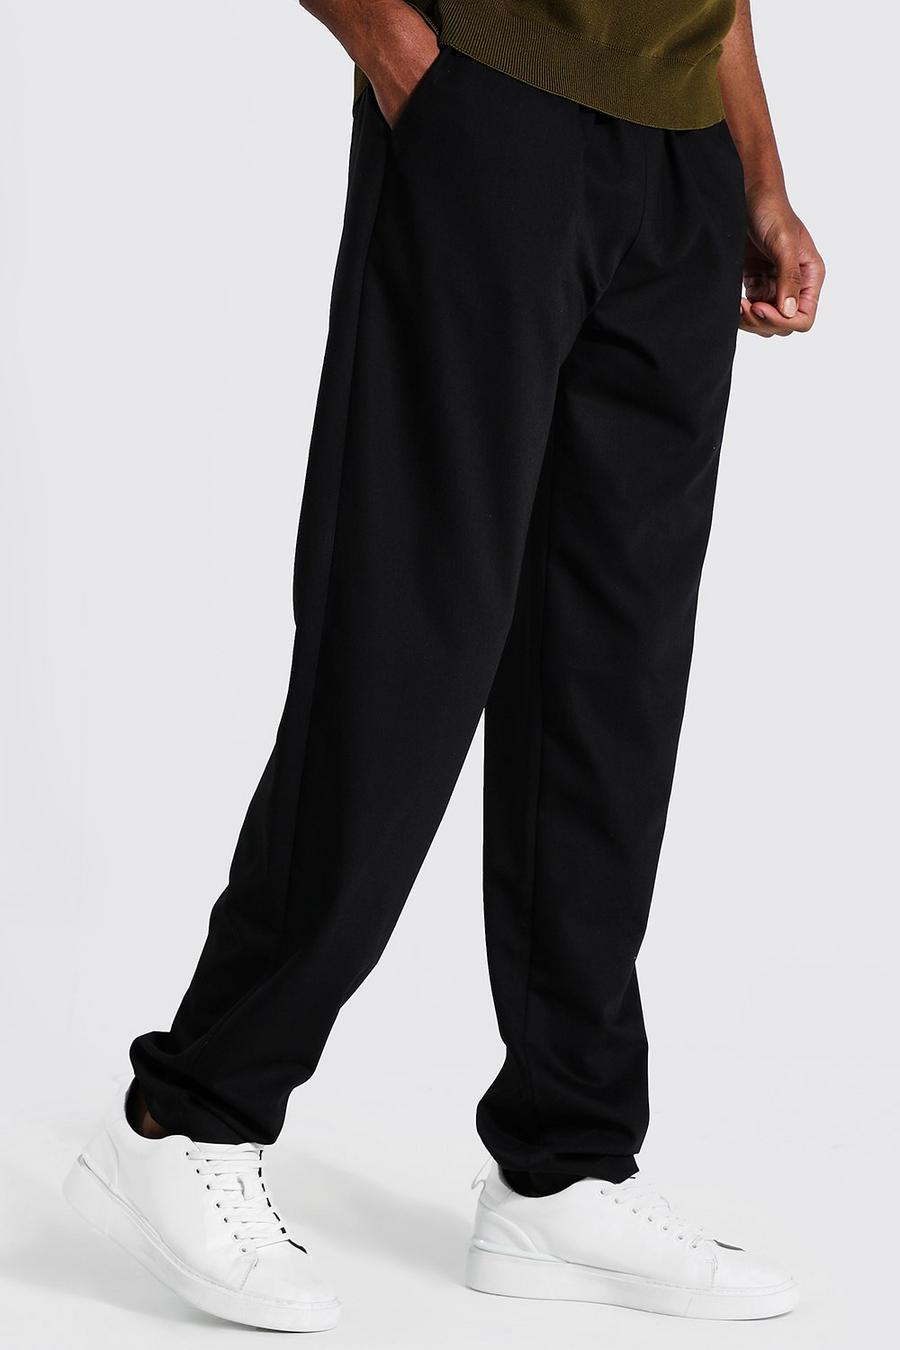 Black Tall Straight Leg Woven Track Pants image number 1